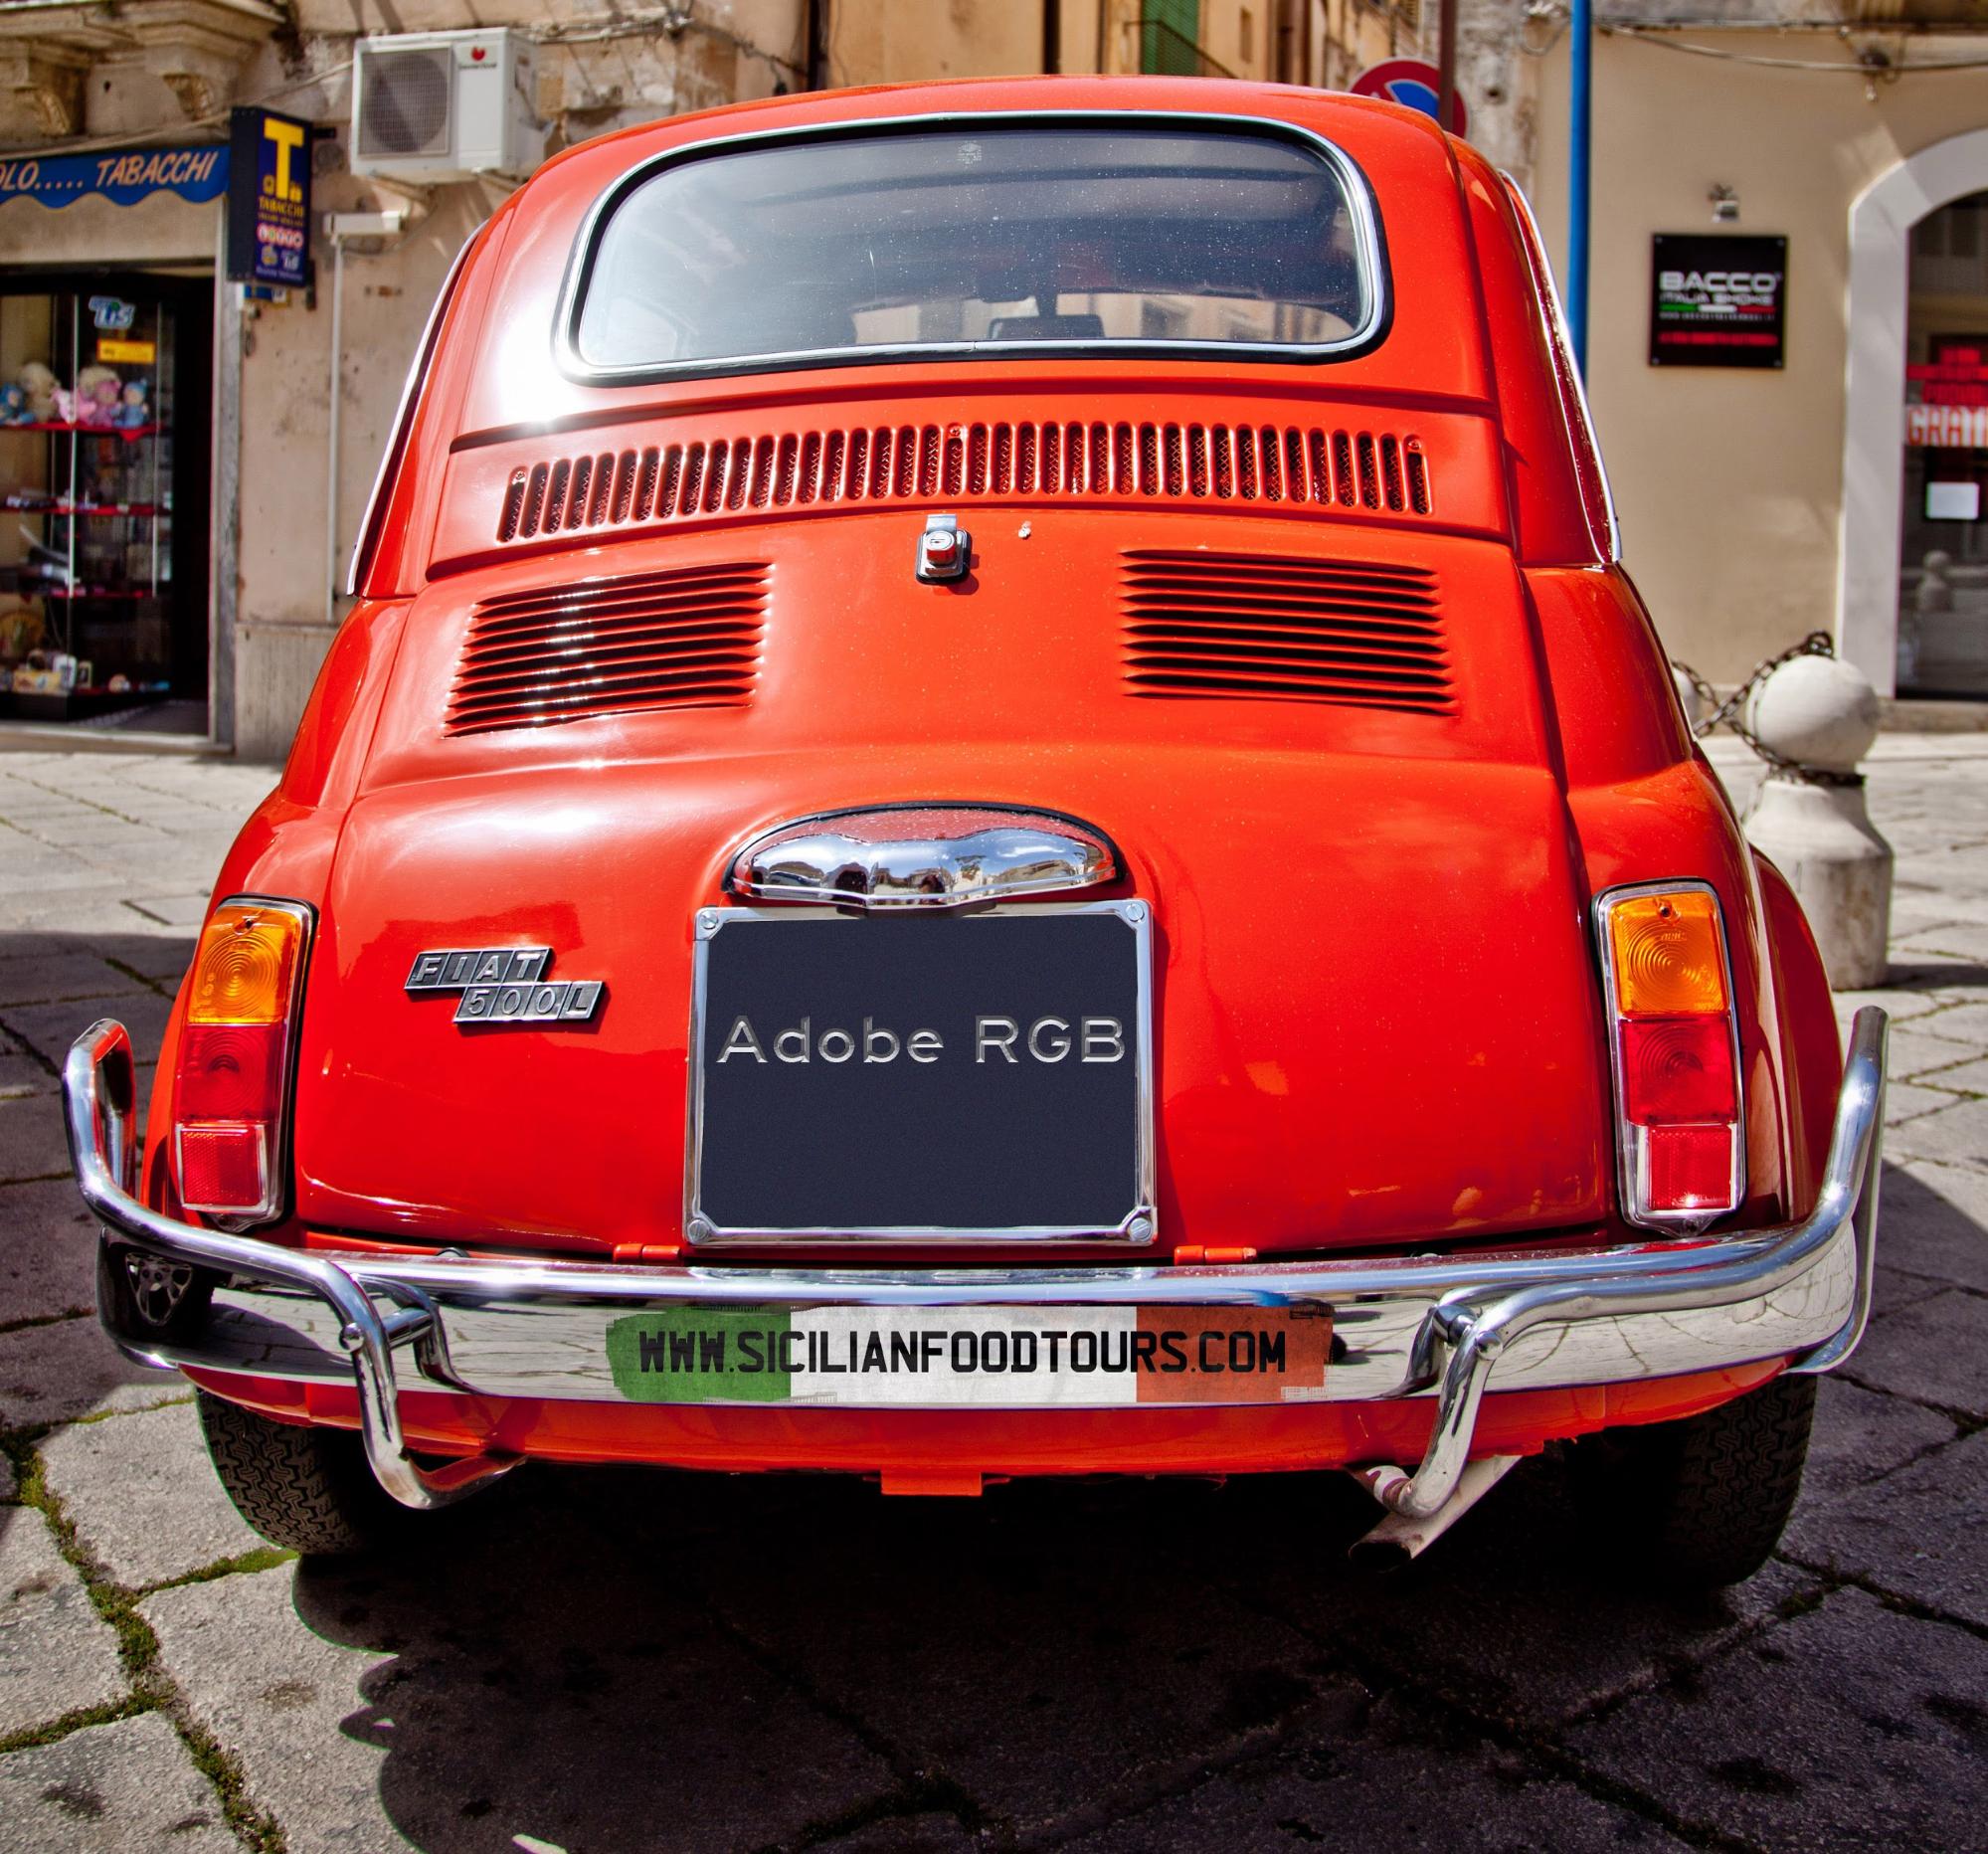 Above: Fiat 500 photographed in Chiaramonte, Sicily